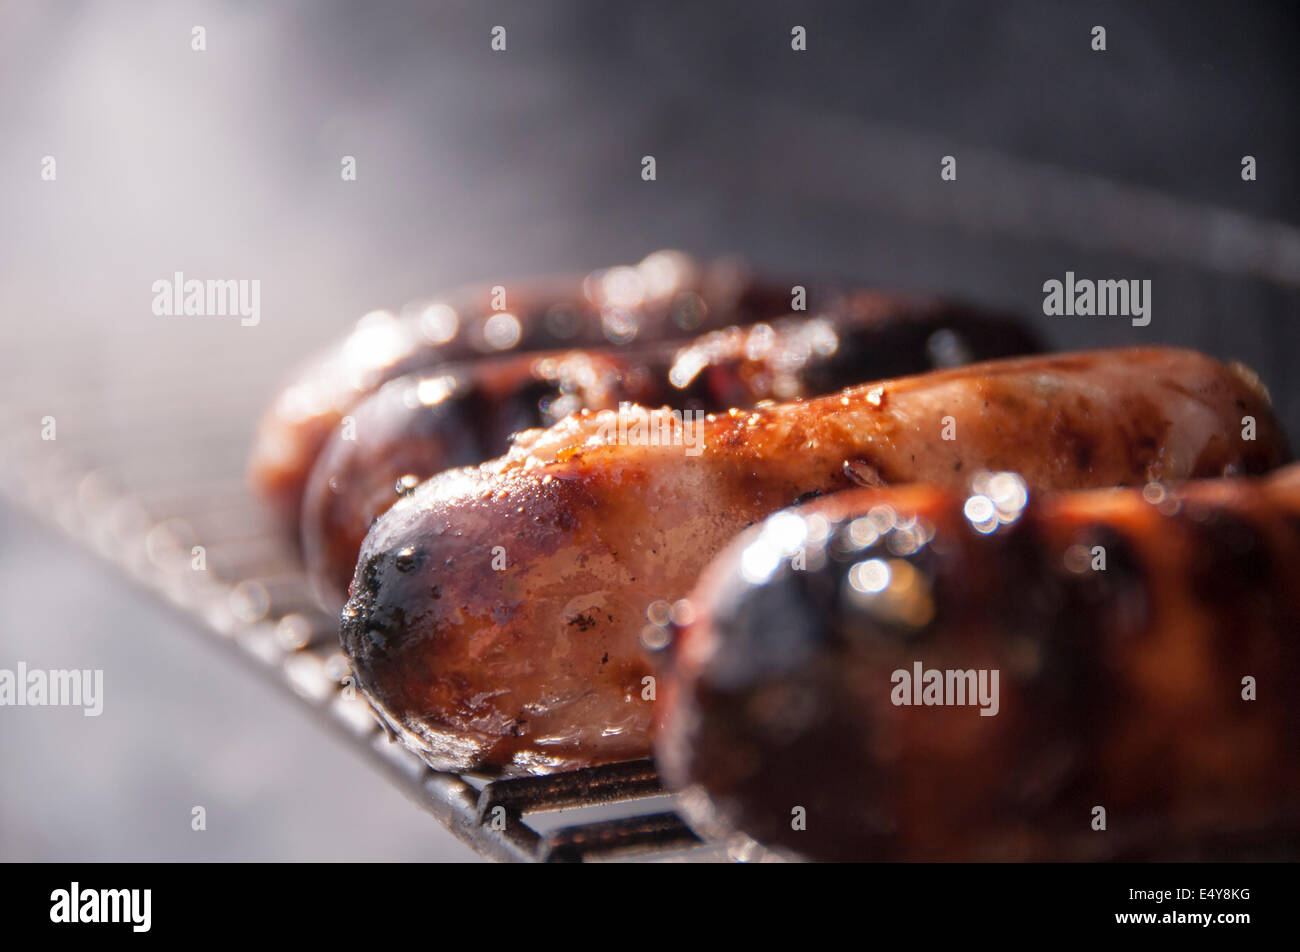 Sausages cooking on a bbq grill, sizzling and smoking away in the sunshine Stock Photo